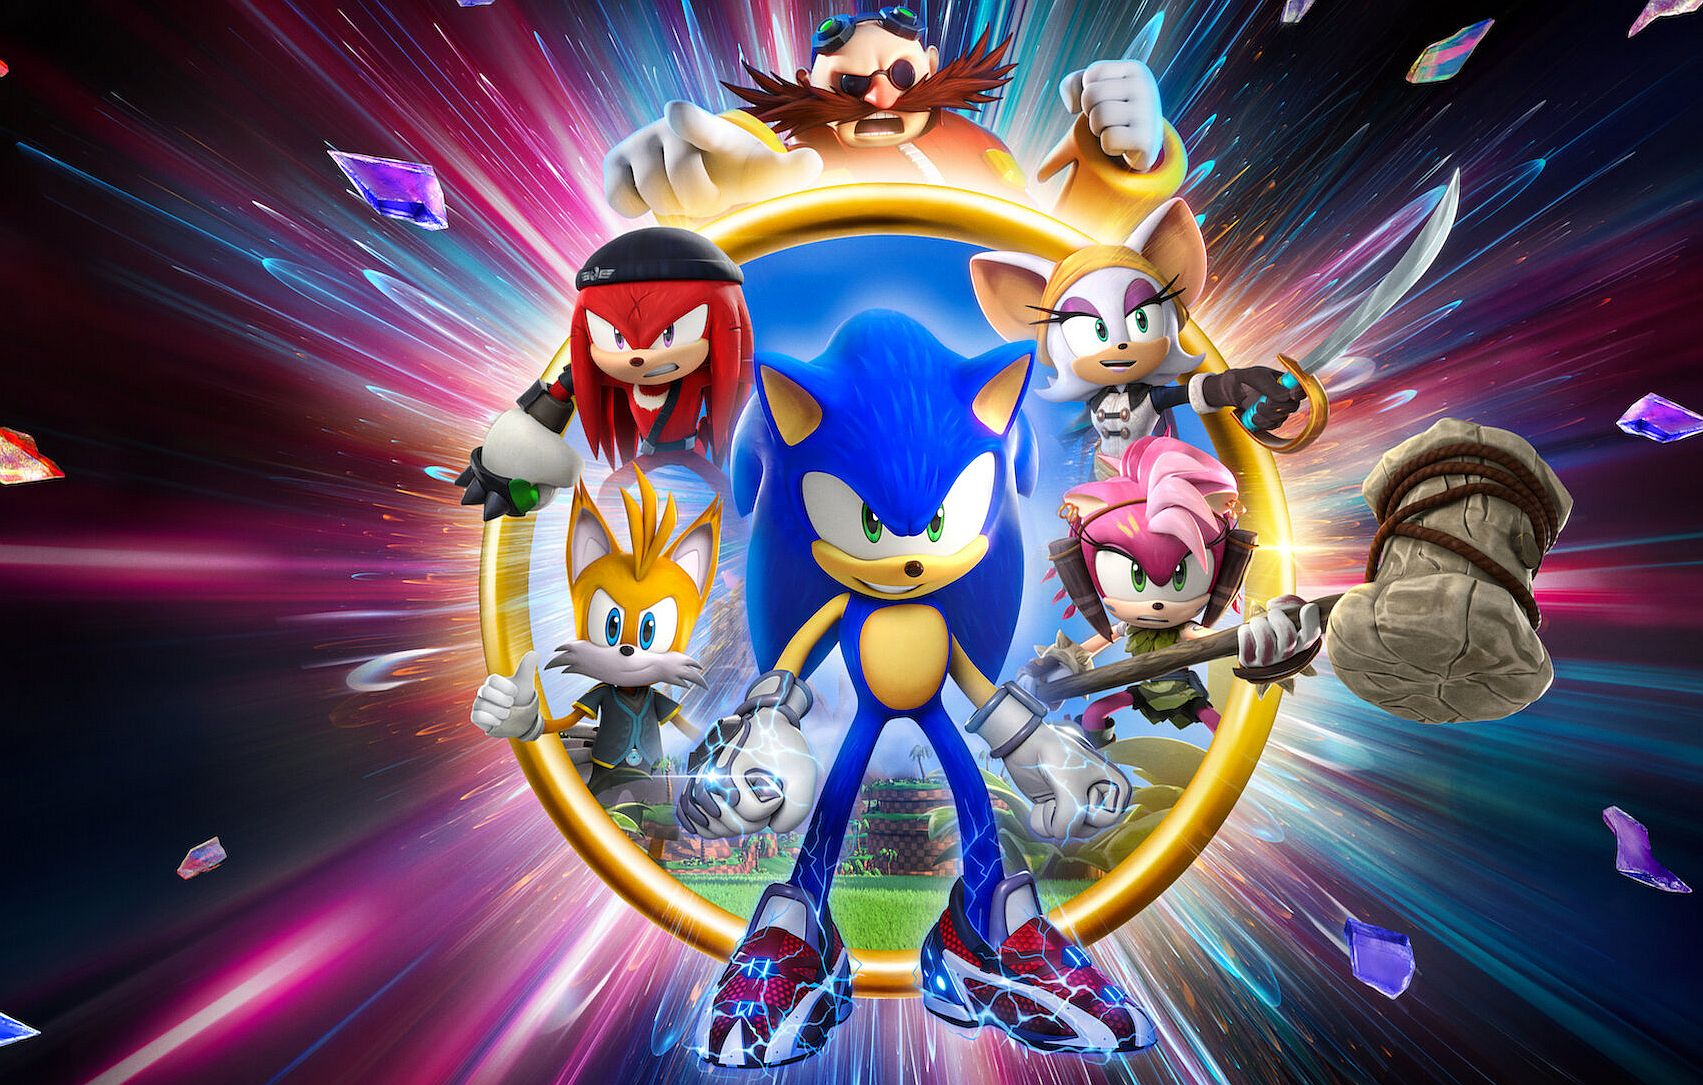 Sonic Prime artwork showing Sonic, Tails, Knuckles, Robotnik, Amy Rose and Rogue